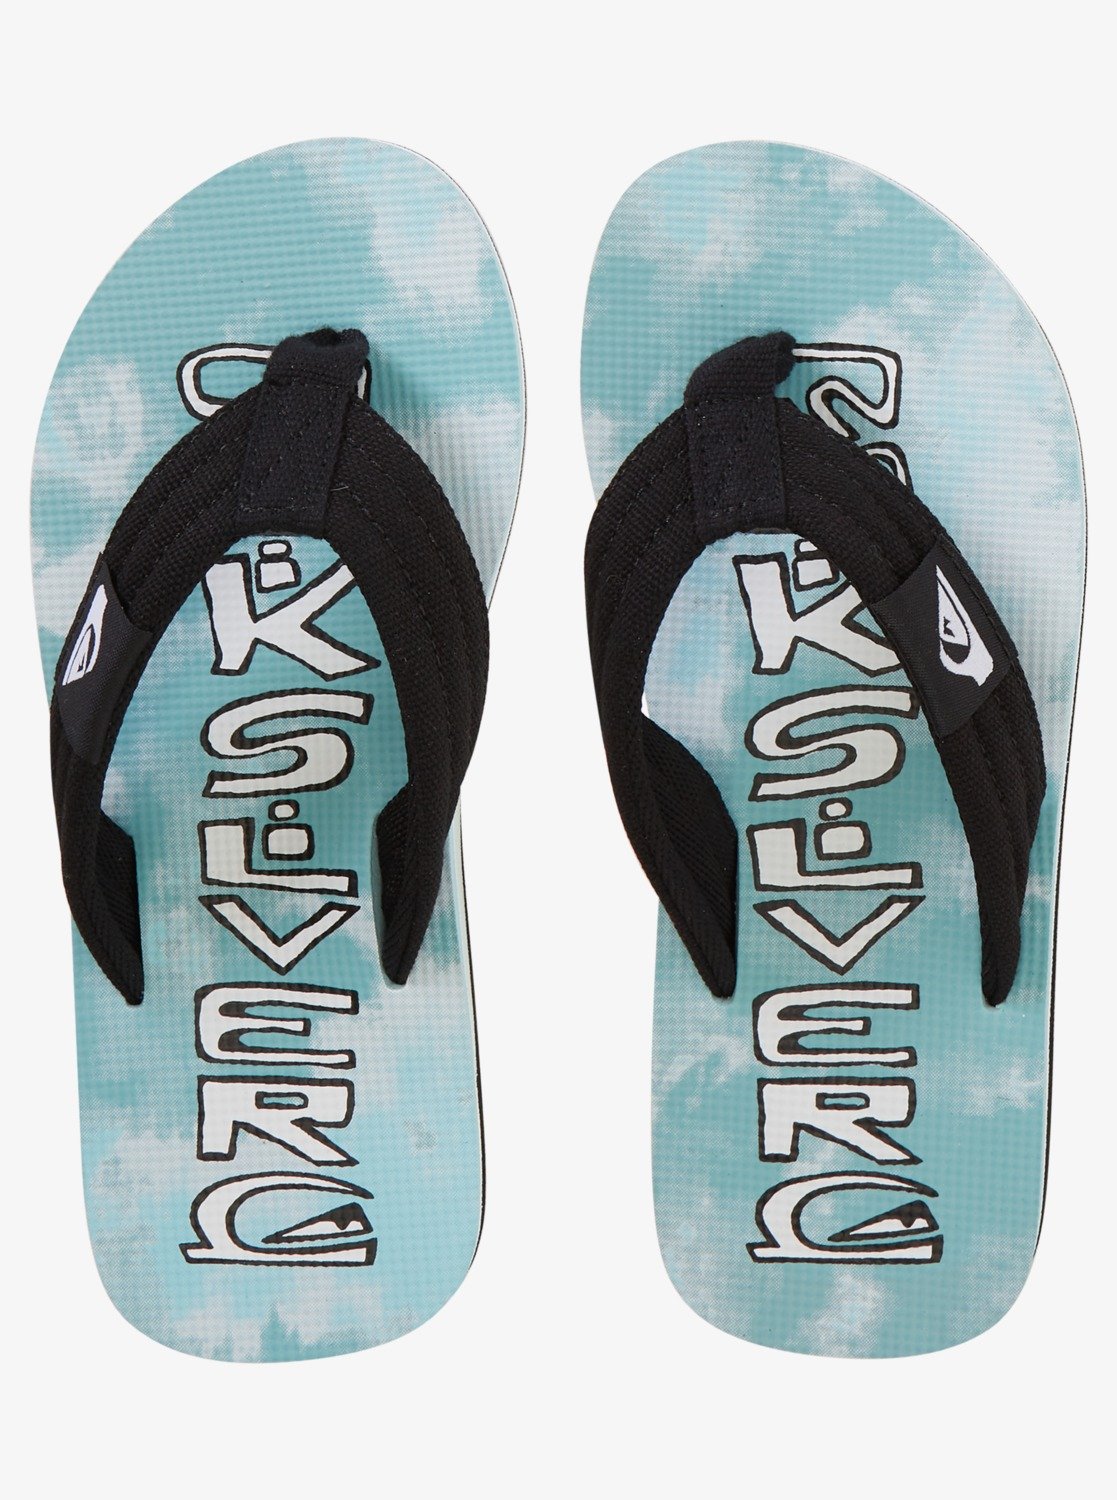 Quiksilver Molokai Layback Youth Sandal BYJ1-Blue 1 13 C